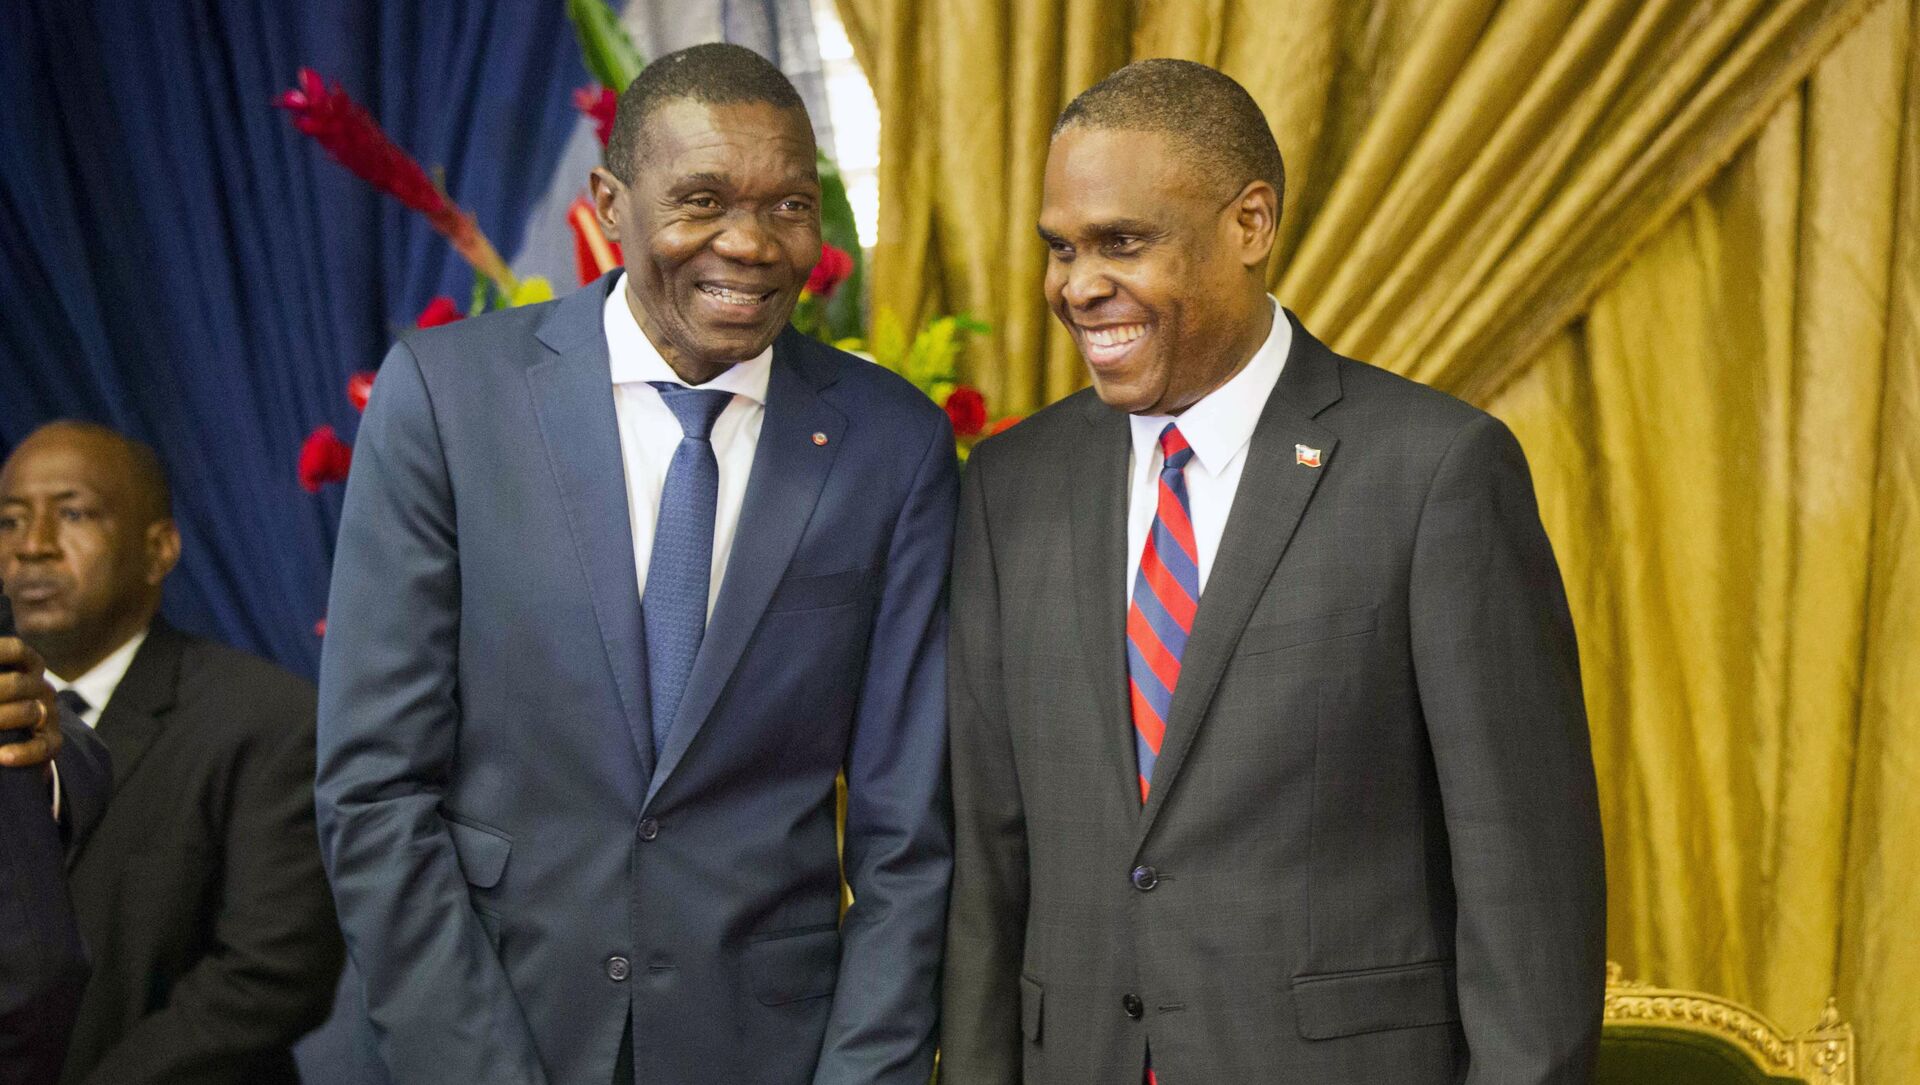 Haiti's new prime minister Jean-Henry Ceant, right, talks to Senate President Joseph Lambert during the nomination ceremony at the national Palace in Port-au-Prince, Haiti, Tuesday, Aug. 7, 2018.  - Sputnik International, 1920, 09.07.2021